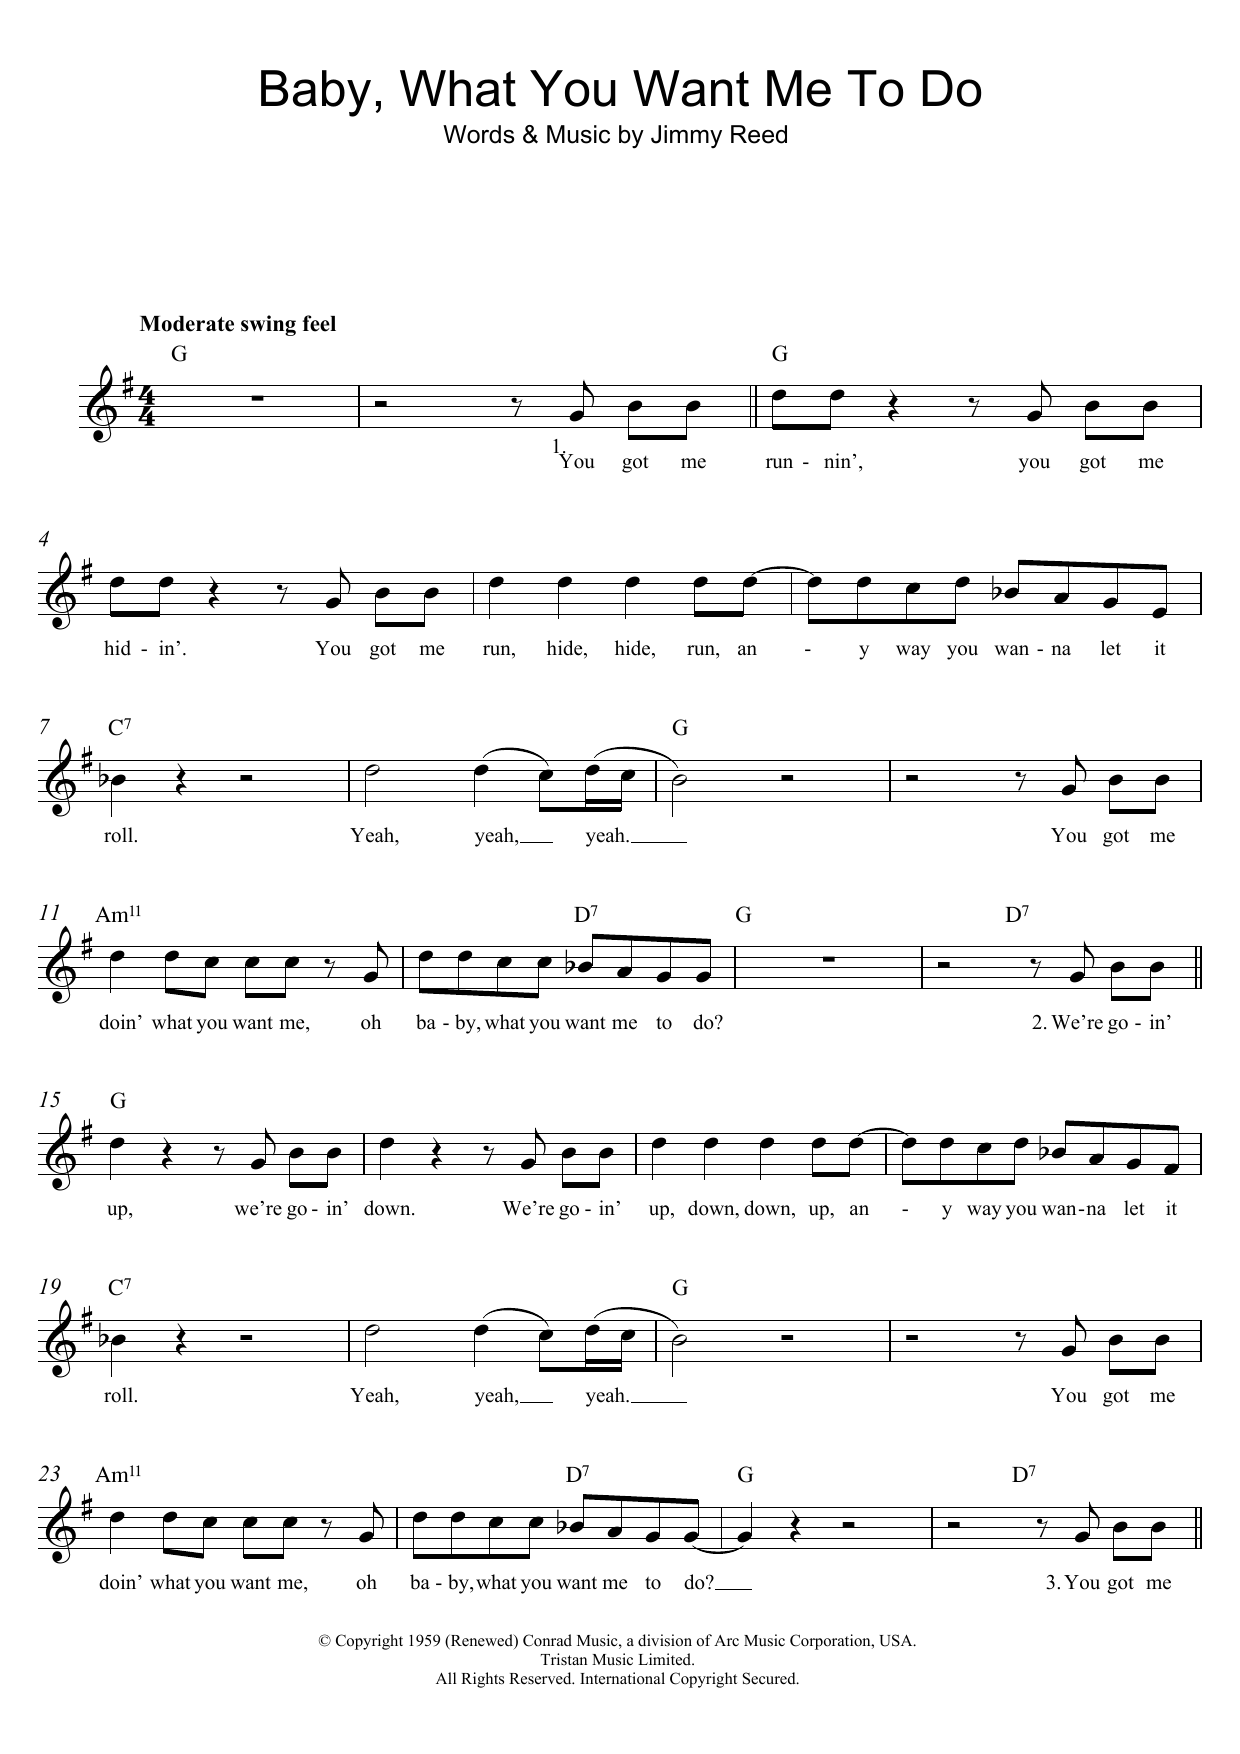 Download Jimmy Reed Baby, What You Want Me To Do Sheet Music